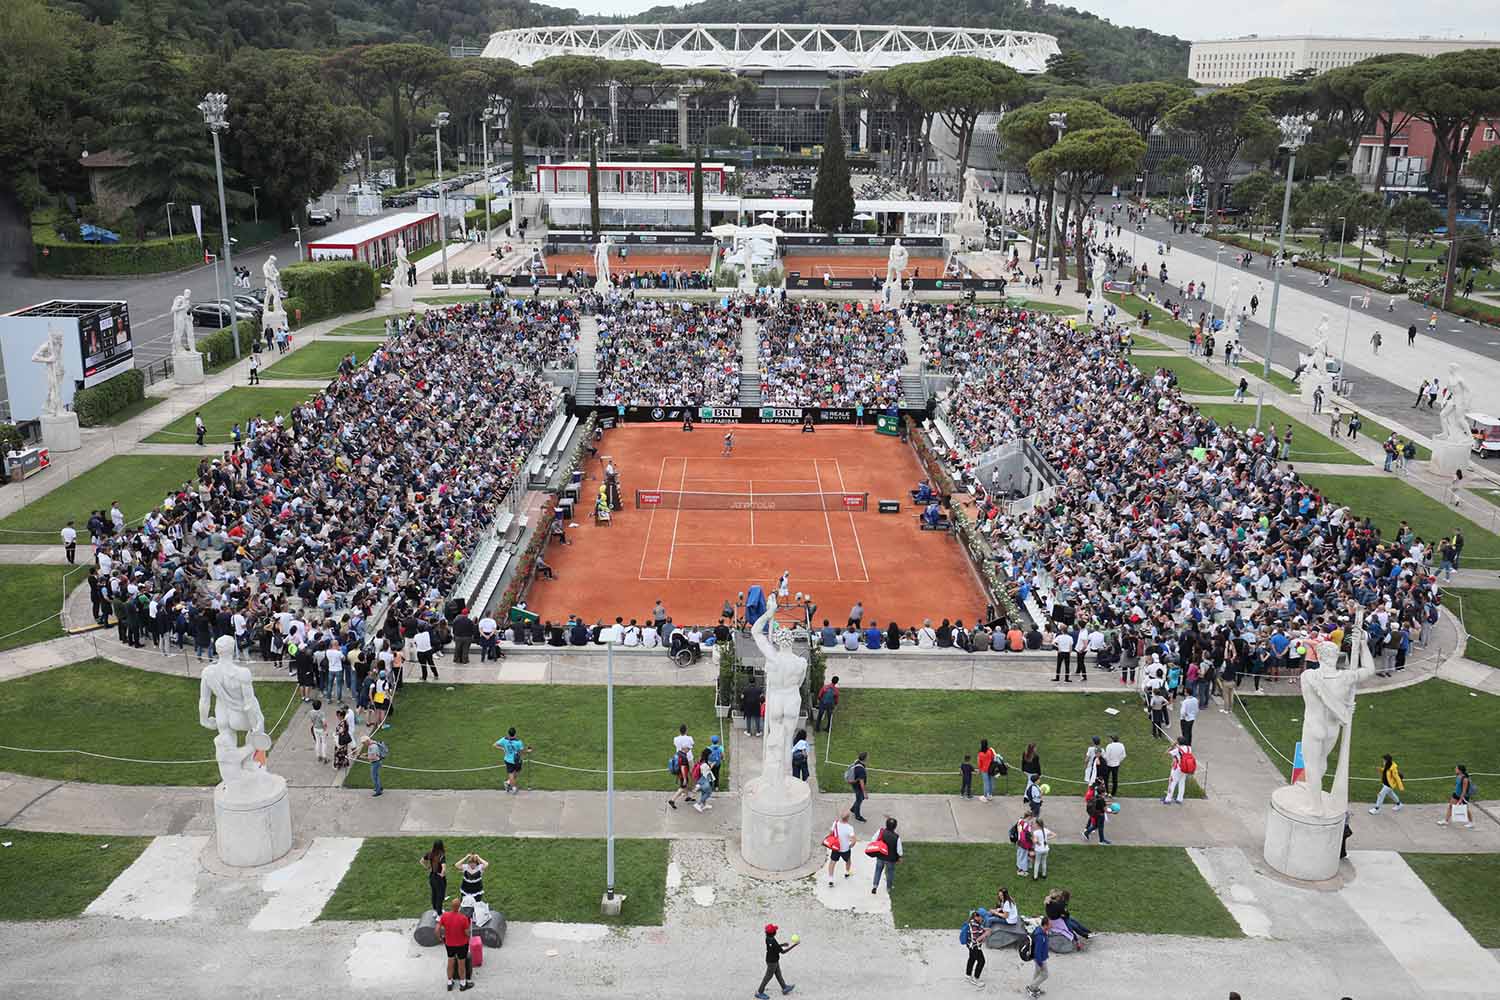 The Italian Open sport and spectacle at Foro Italico